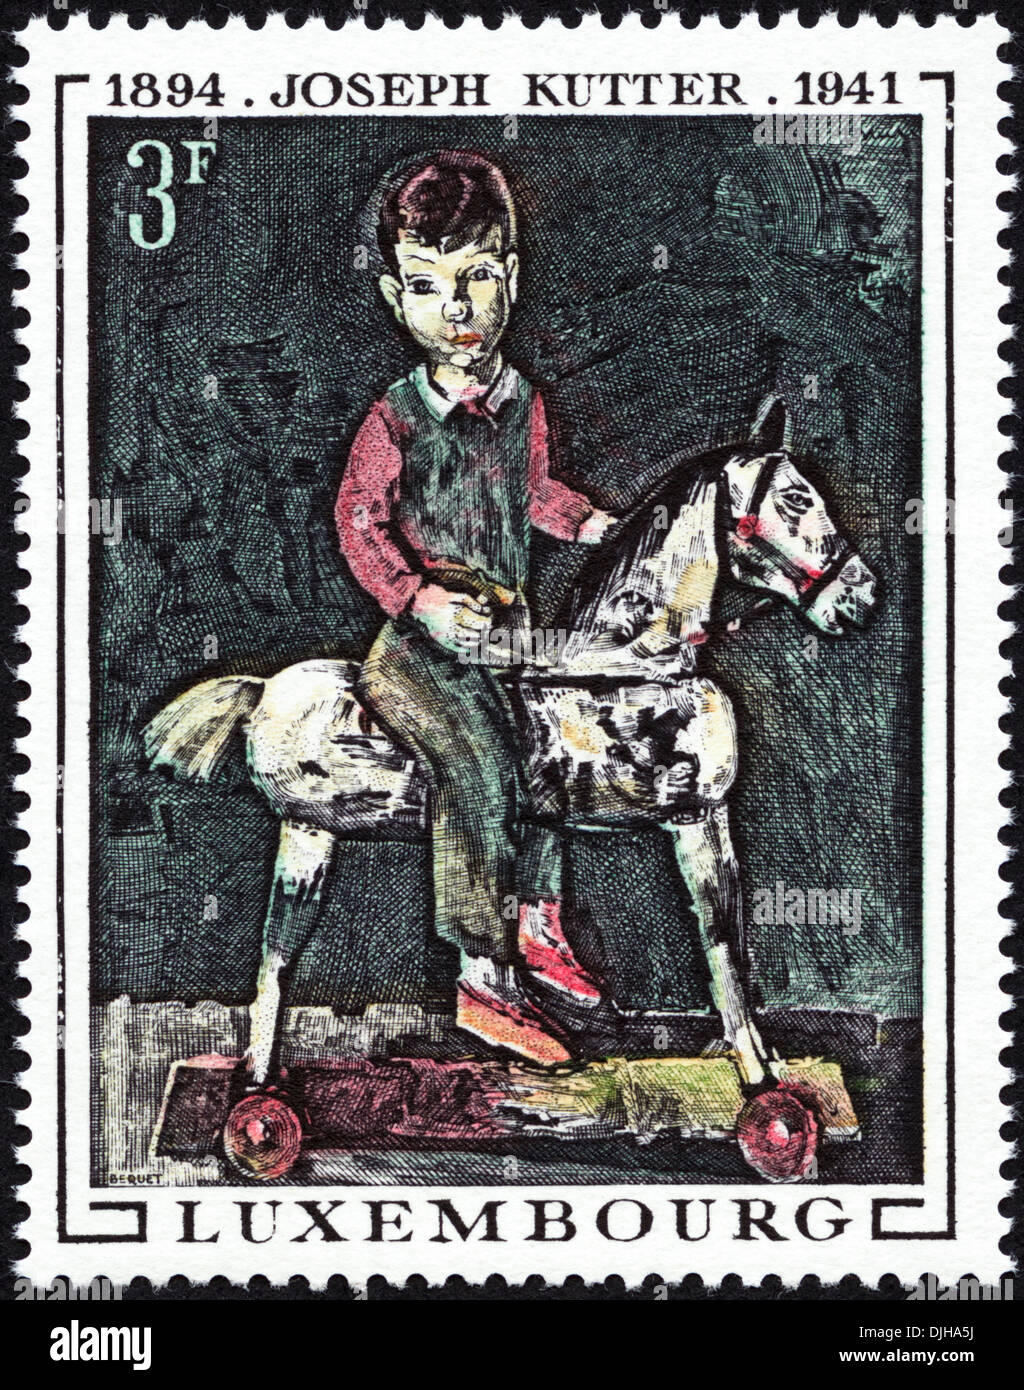 postage stamp Luxembourgh 3F featuring artist Joseph Kutter 1894 - 1941 dated 1969 Stock Photo